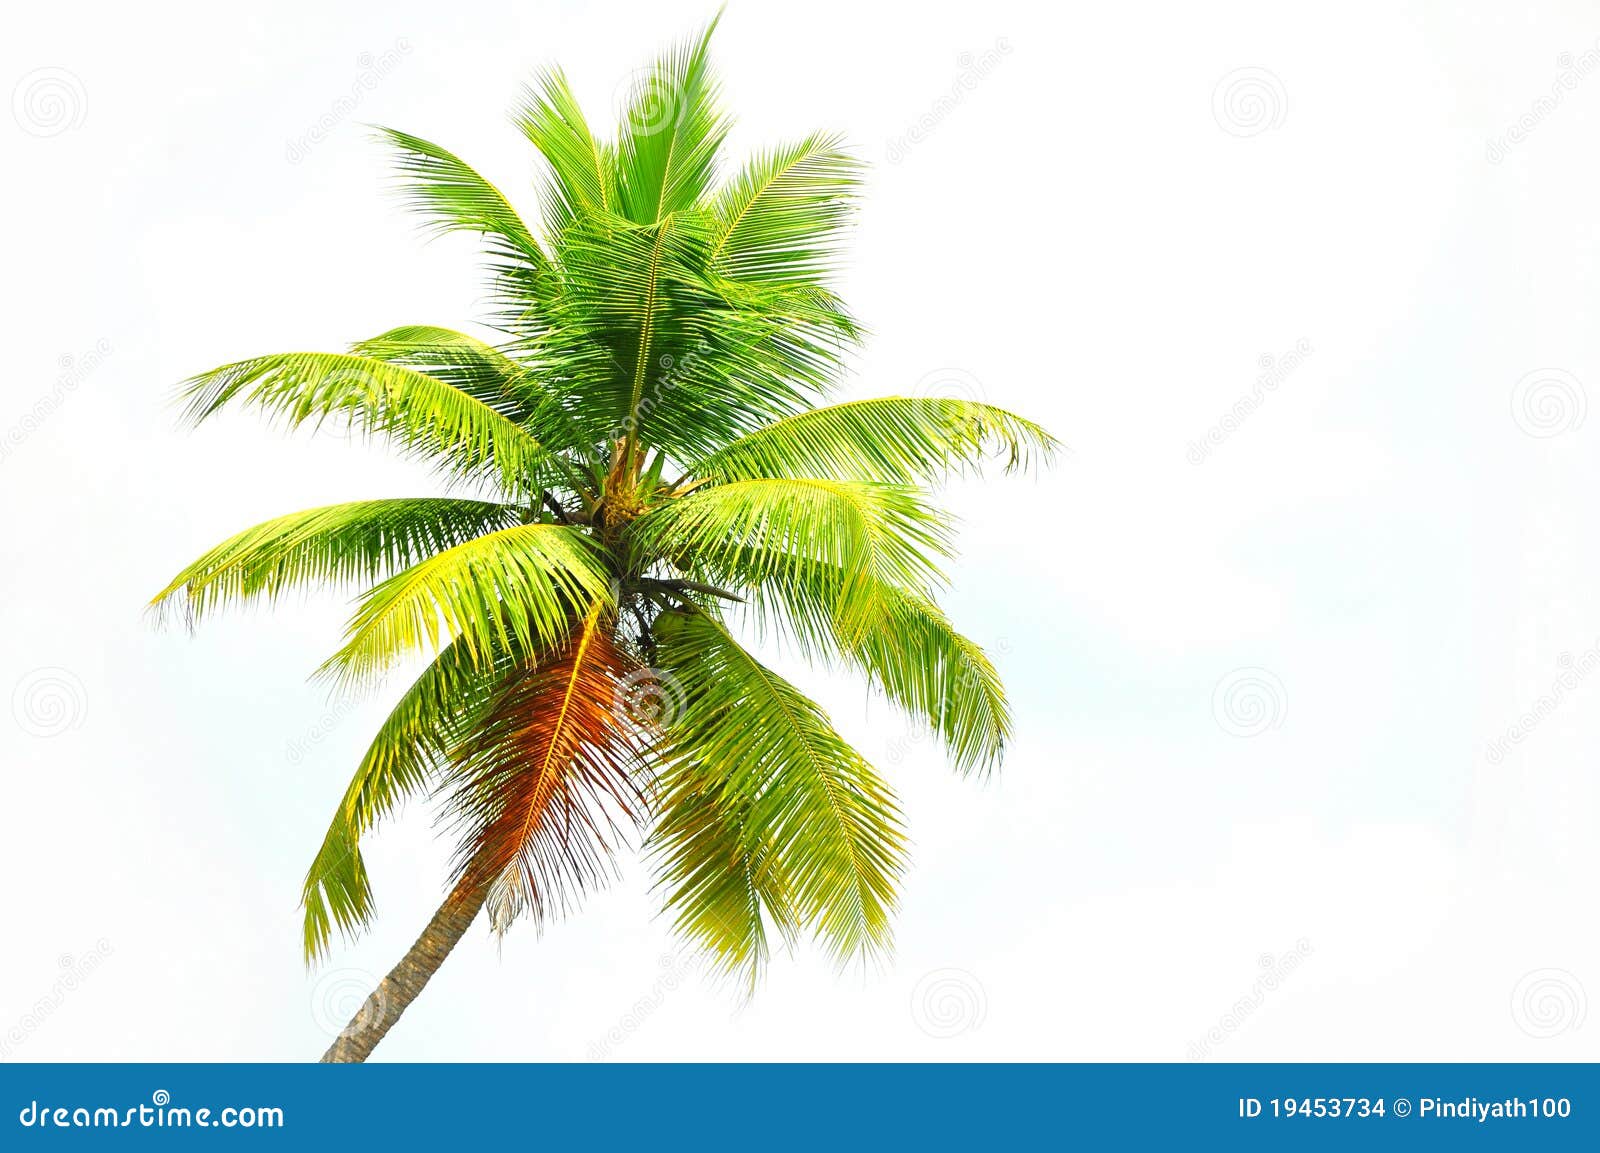 Coconut Tree Stock Images  Image: 19453734